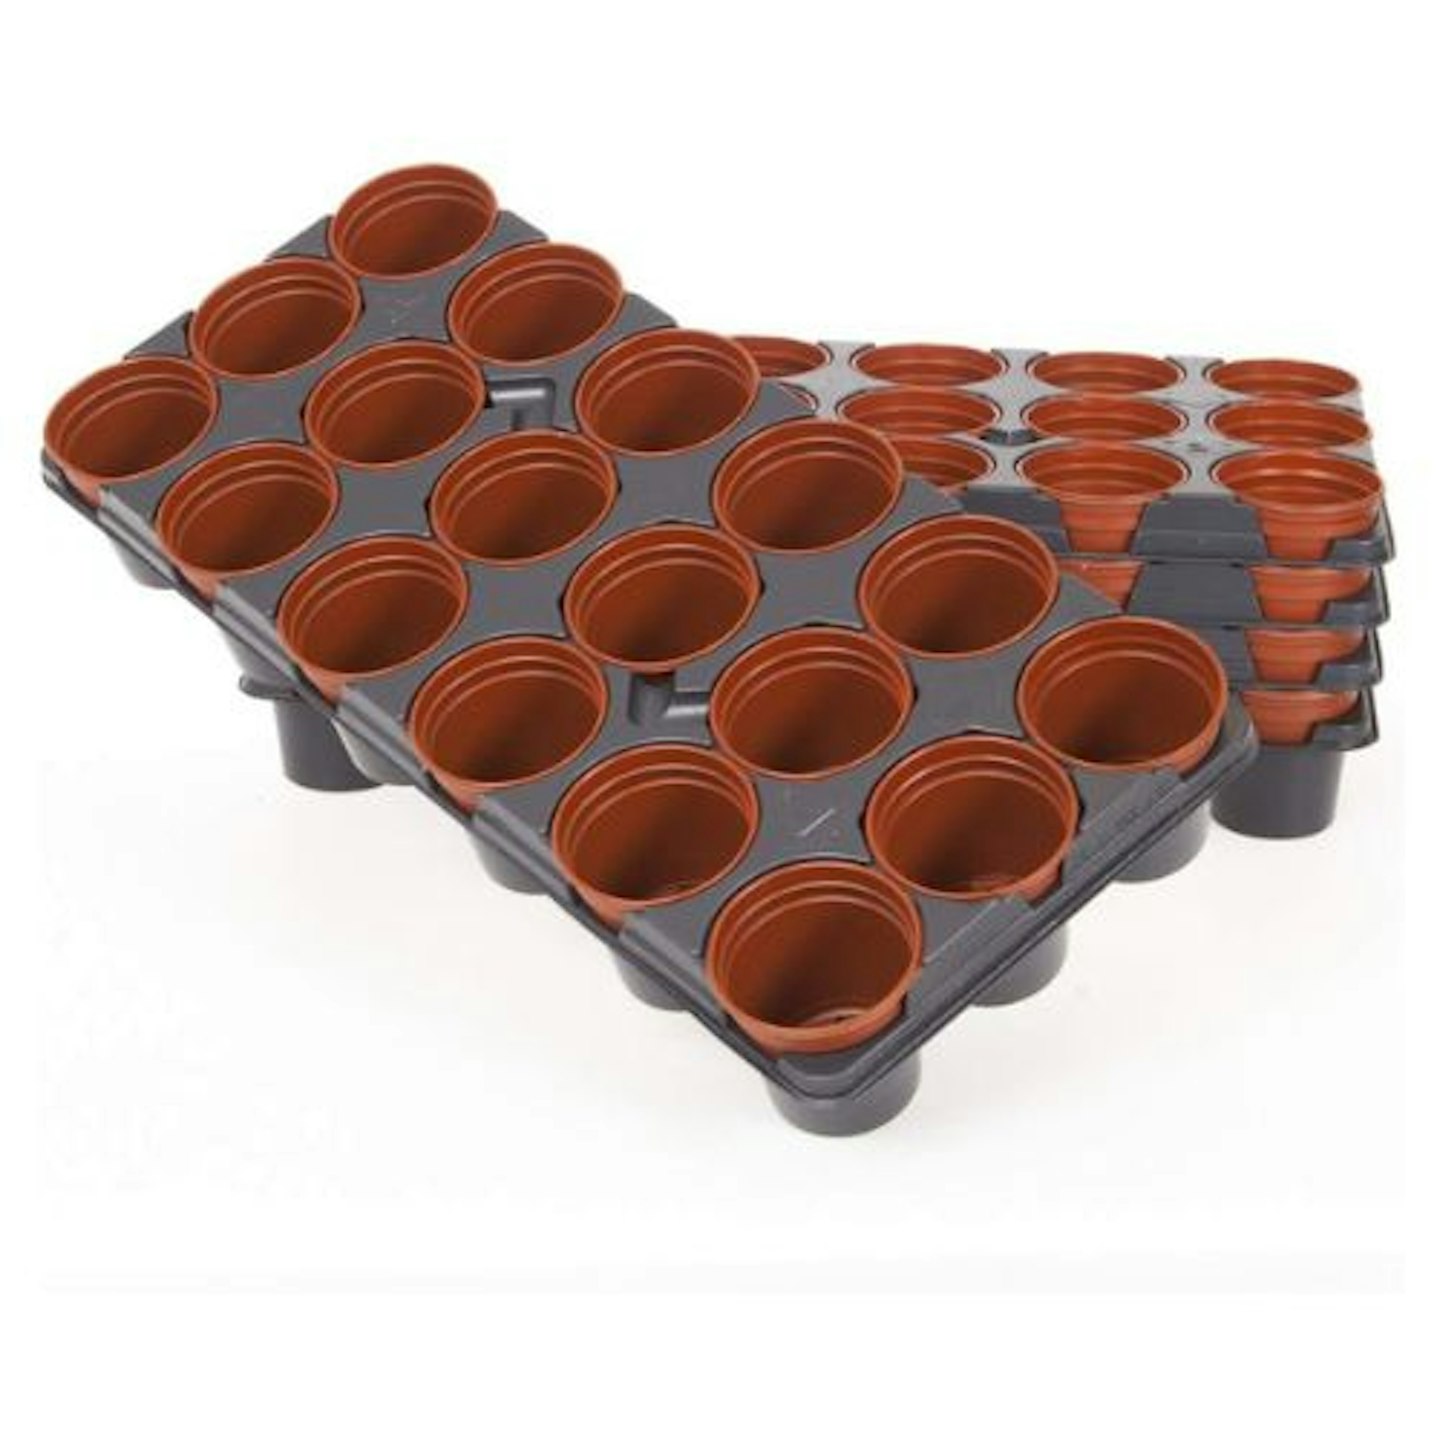 YouGarden - Professional Shuttle Trays and Pots for Growing On Plants, Seedling Pots, 5 Trays, 90 Pots in Total - Perfect for any Gardener Gorwing on Pots...